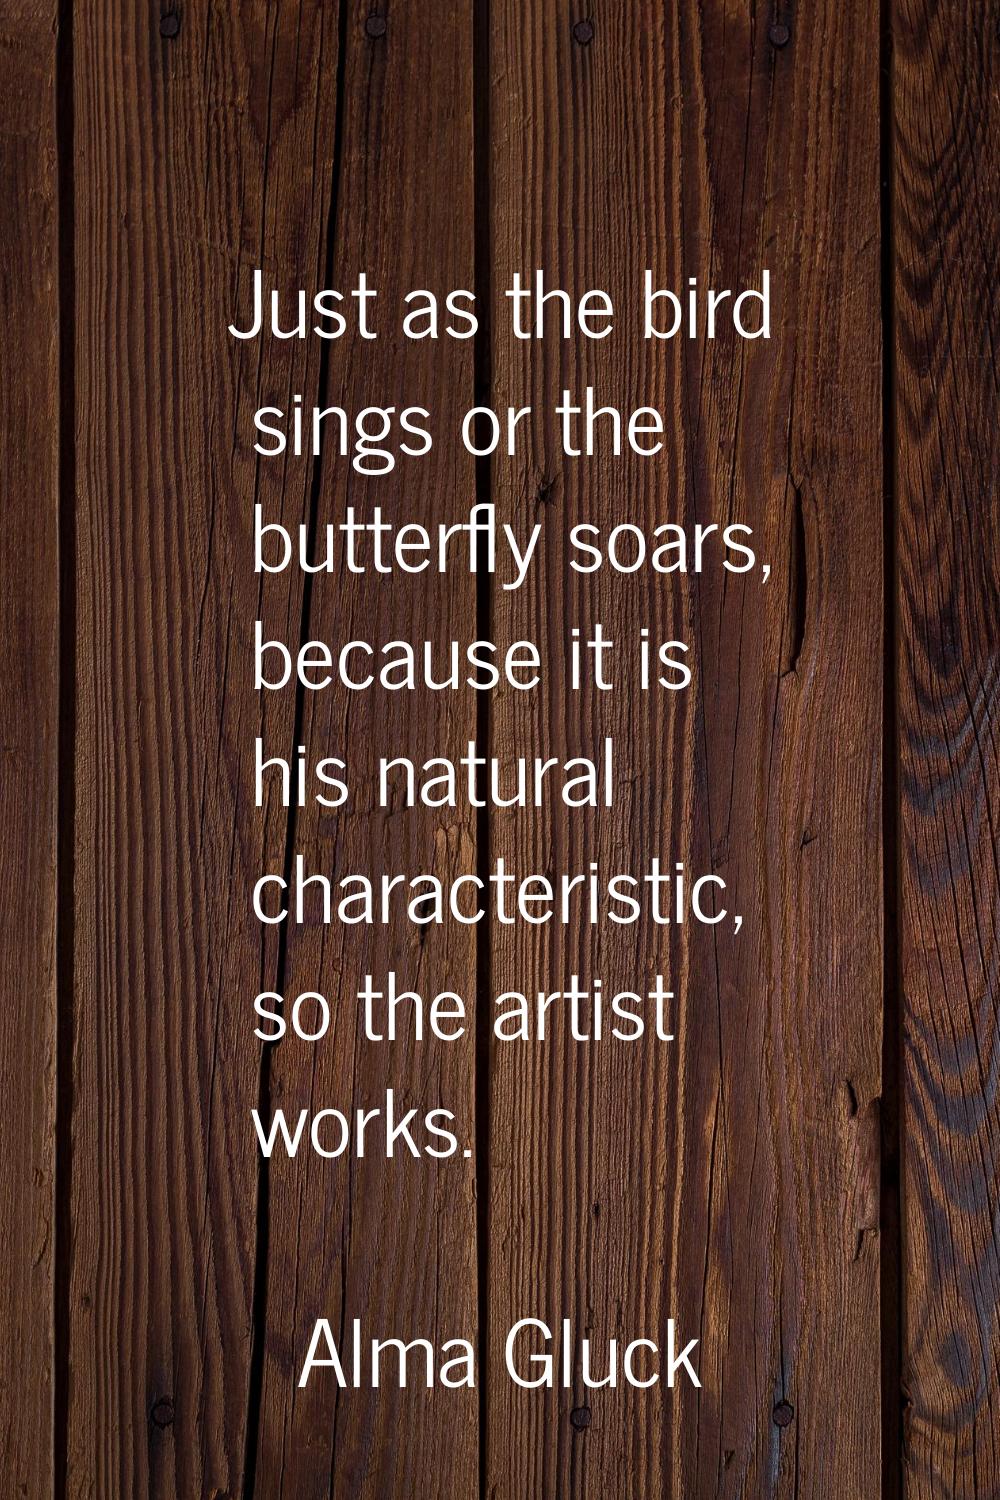 Just as the bird sings or the butterfly soars, because it is his natural characteristic, so the art